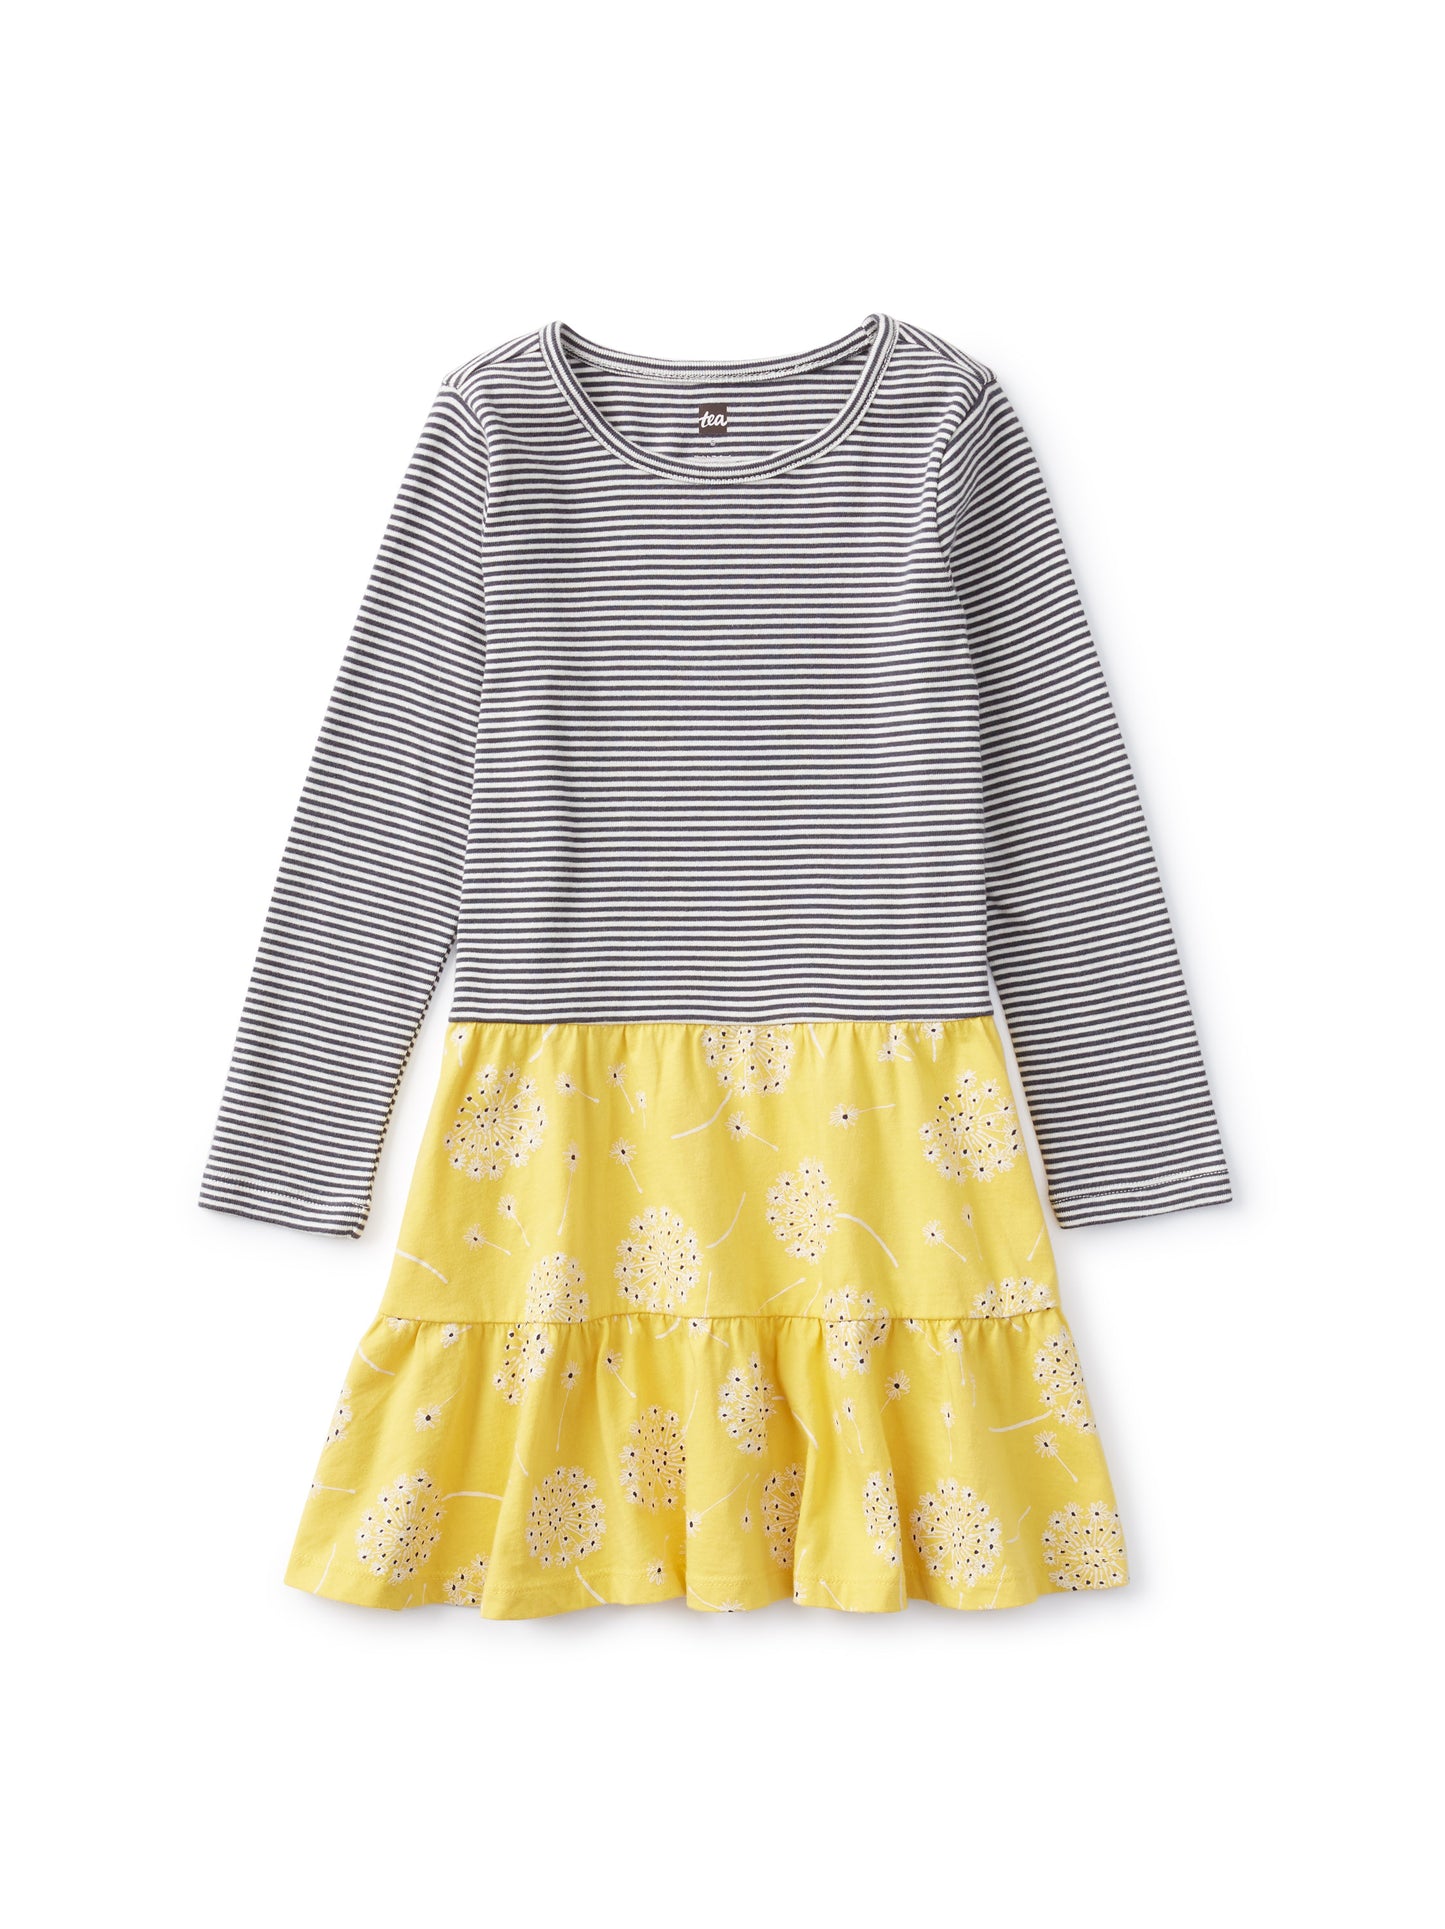 Tiered Skirted Dress - Tossed Dandelions